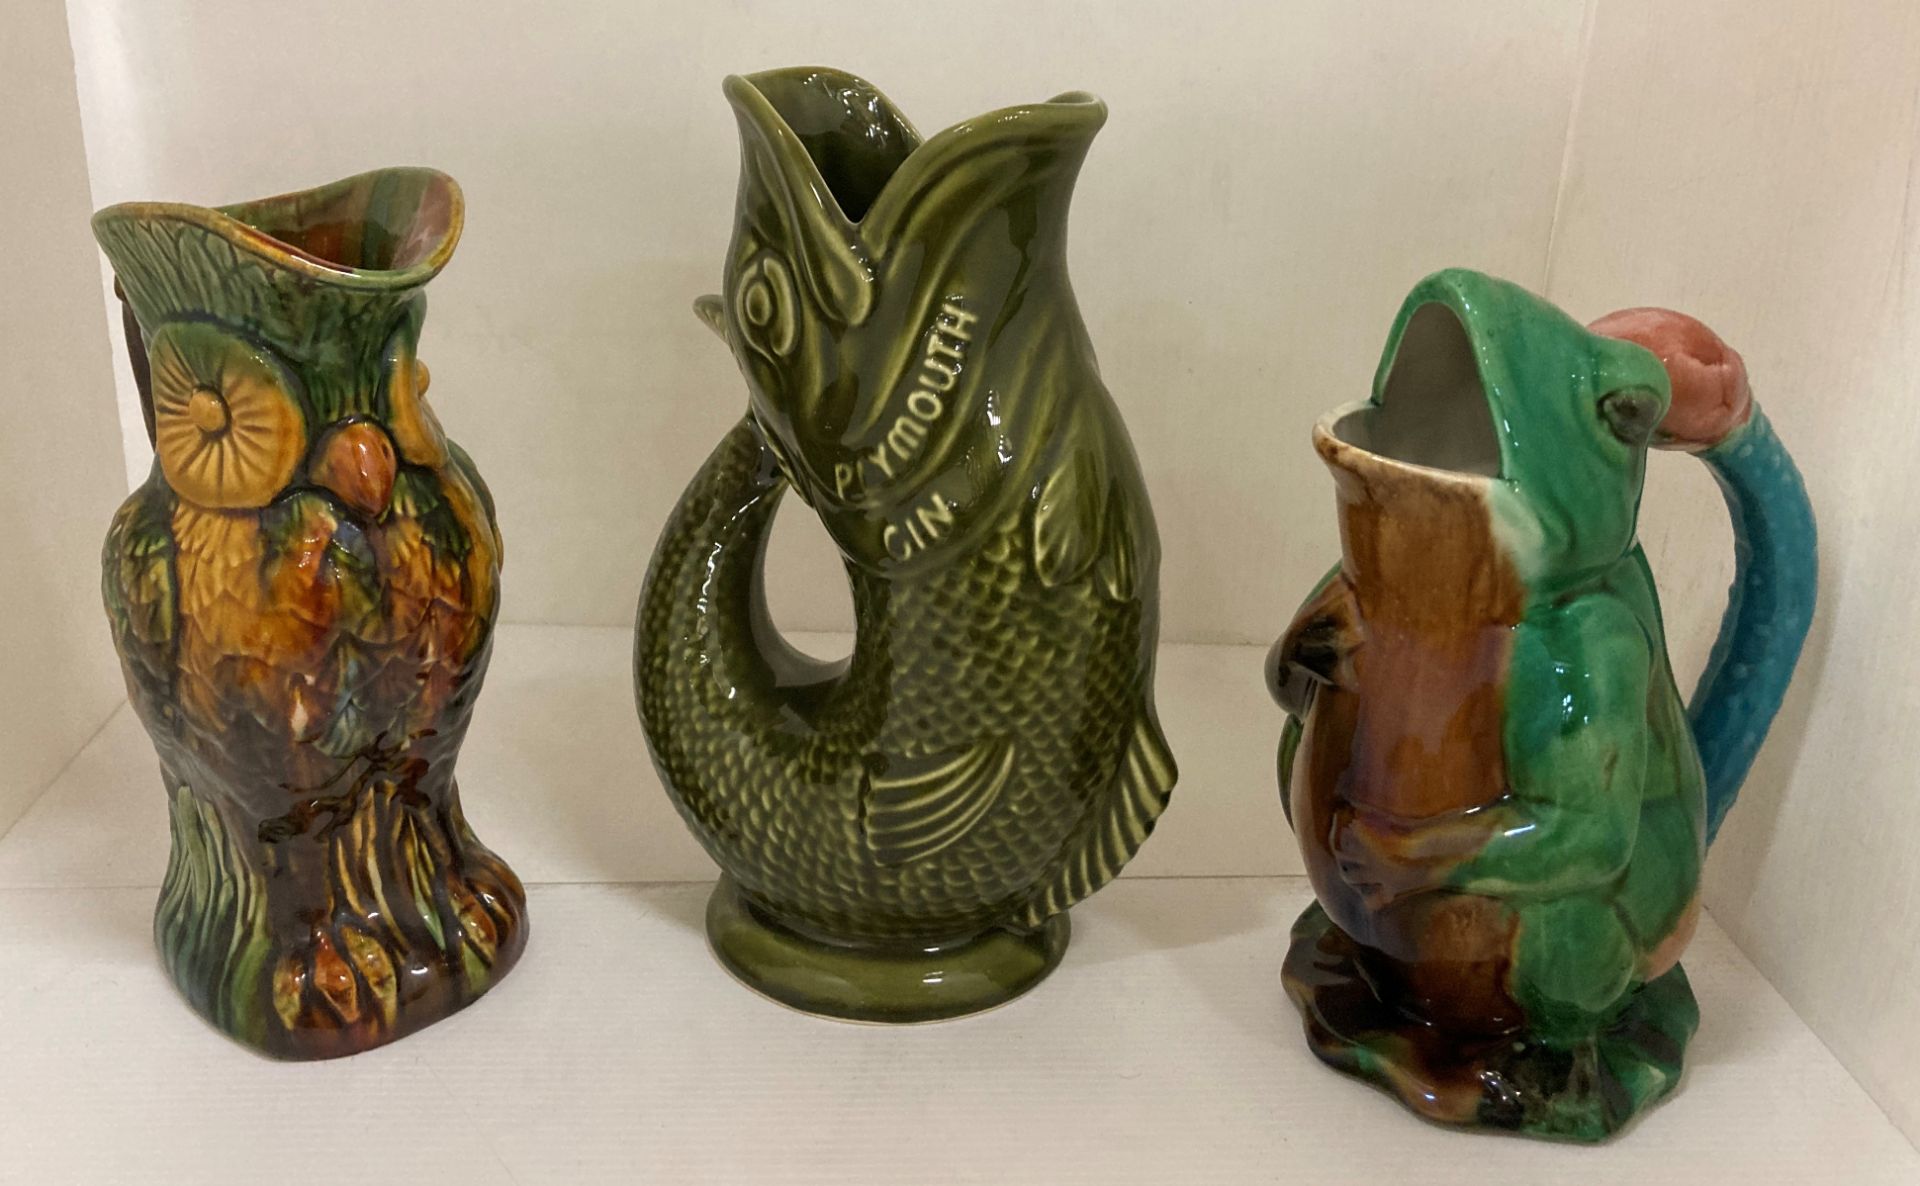 A Dartmouth Devon Plymouth Gin green glazed fish jug, frog and parrot jugs, etc. - Image 2 of 4